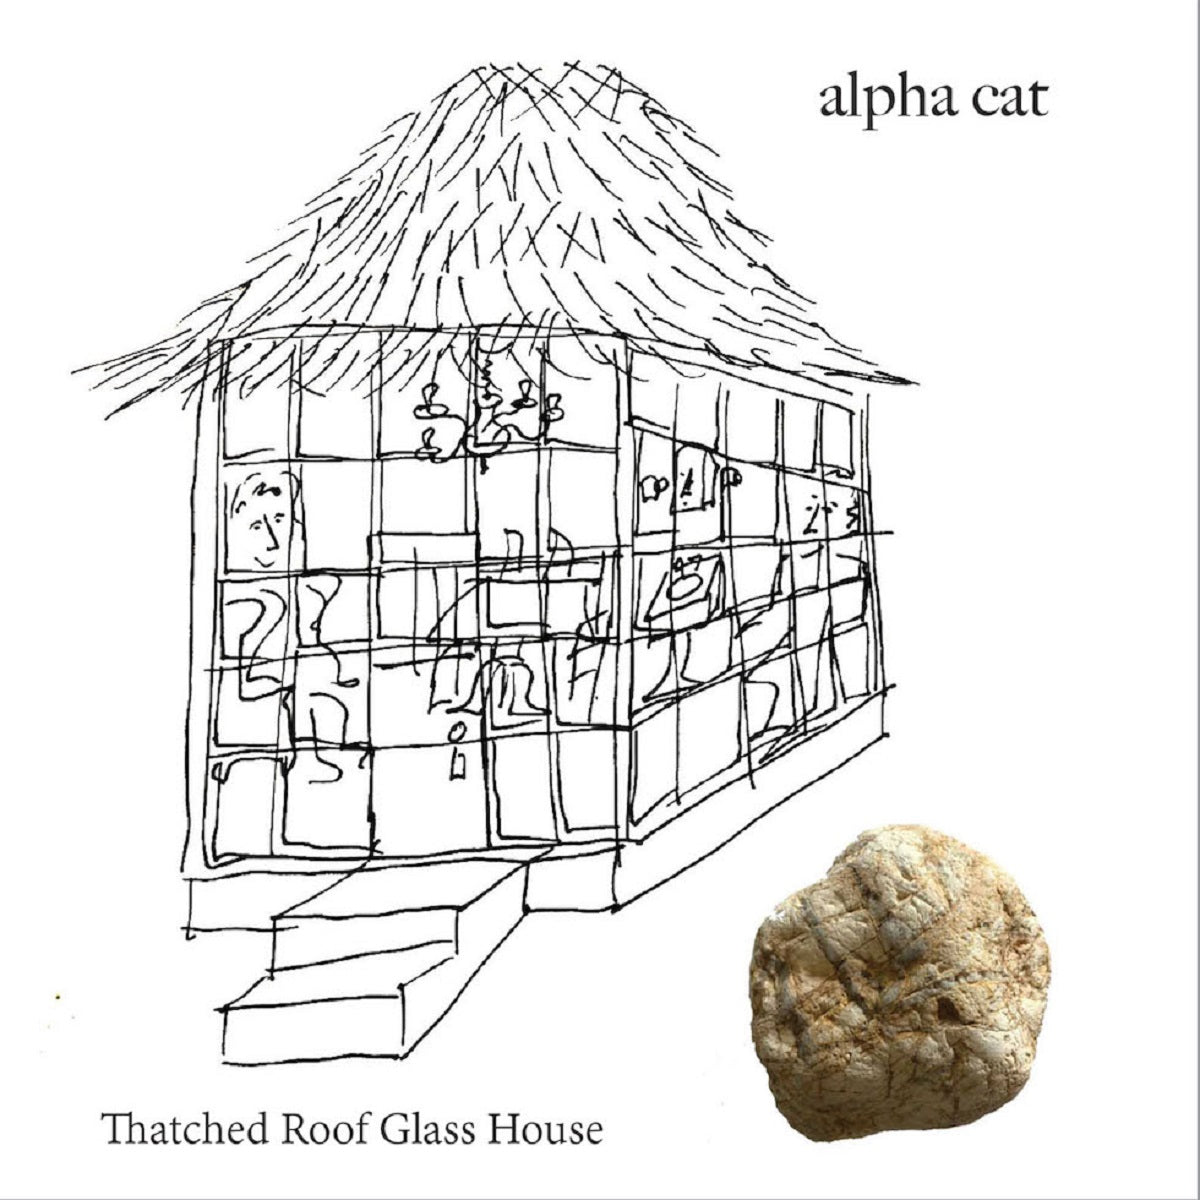 Alpha Cat – ‘Thatched Roof Glass House’